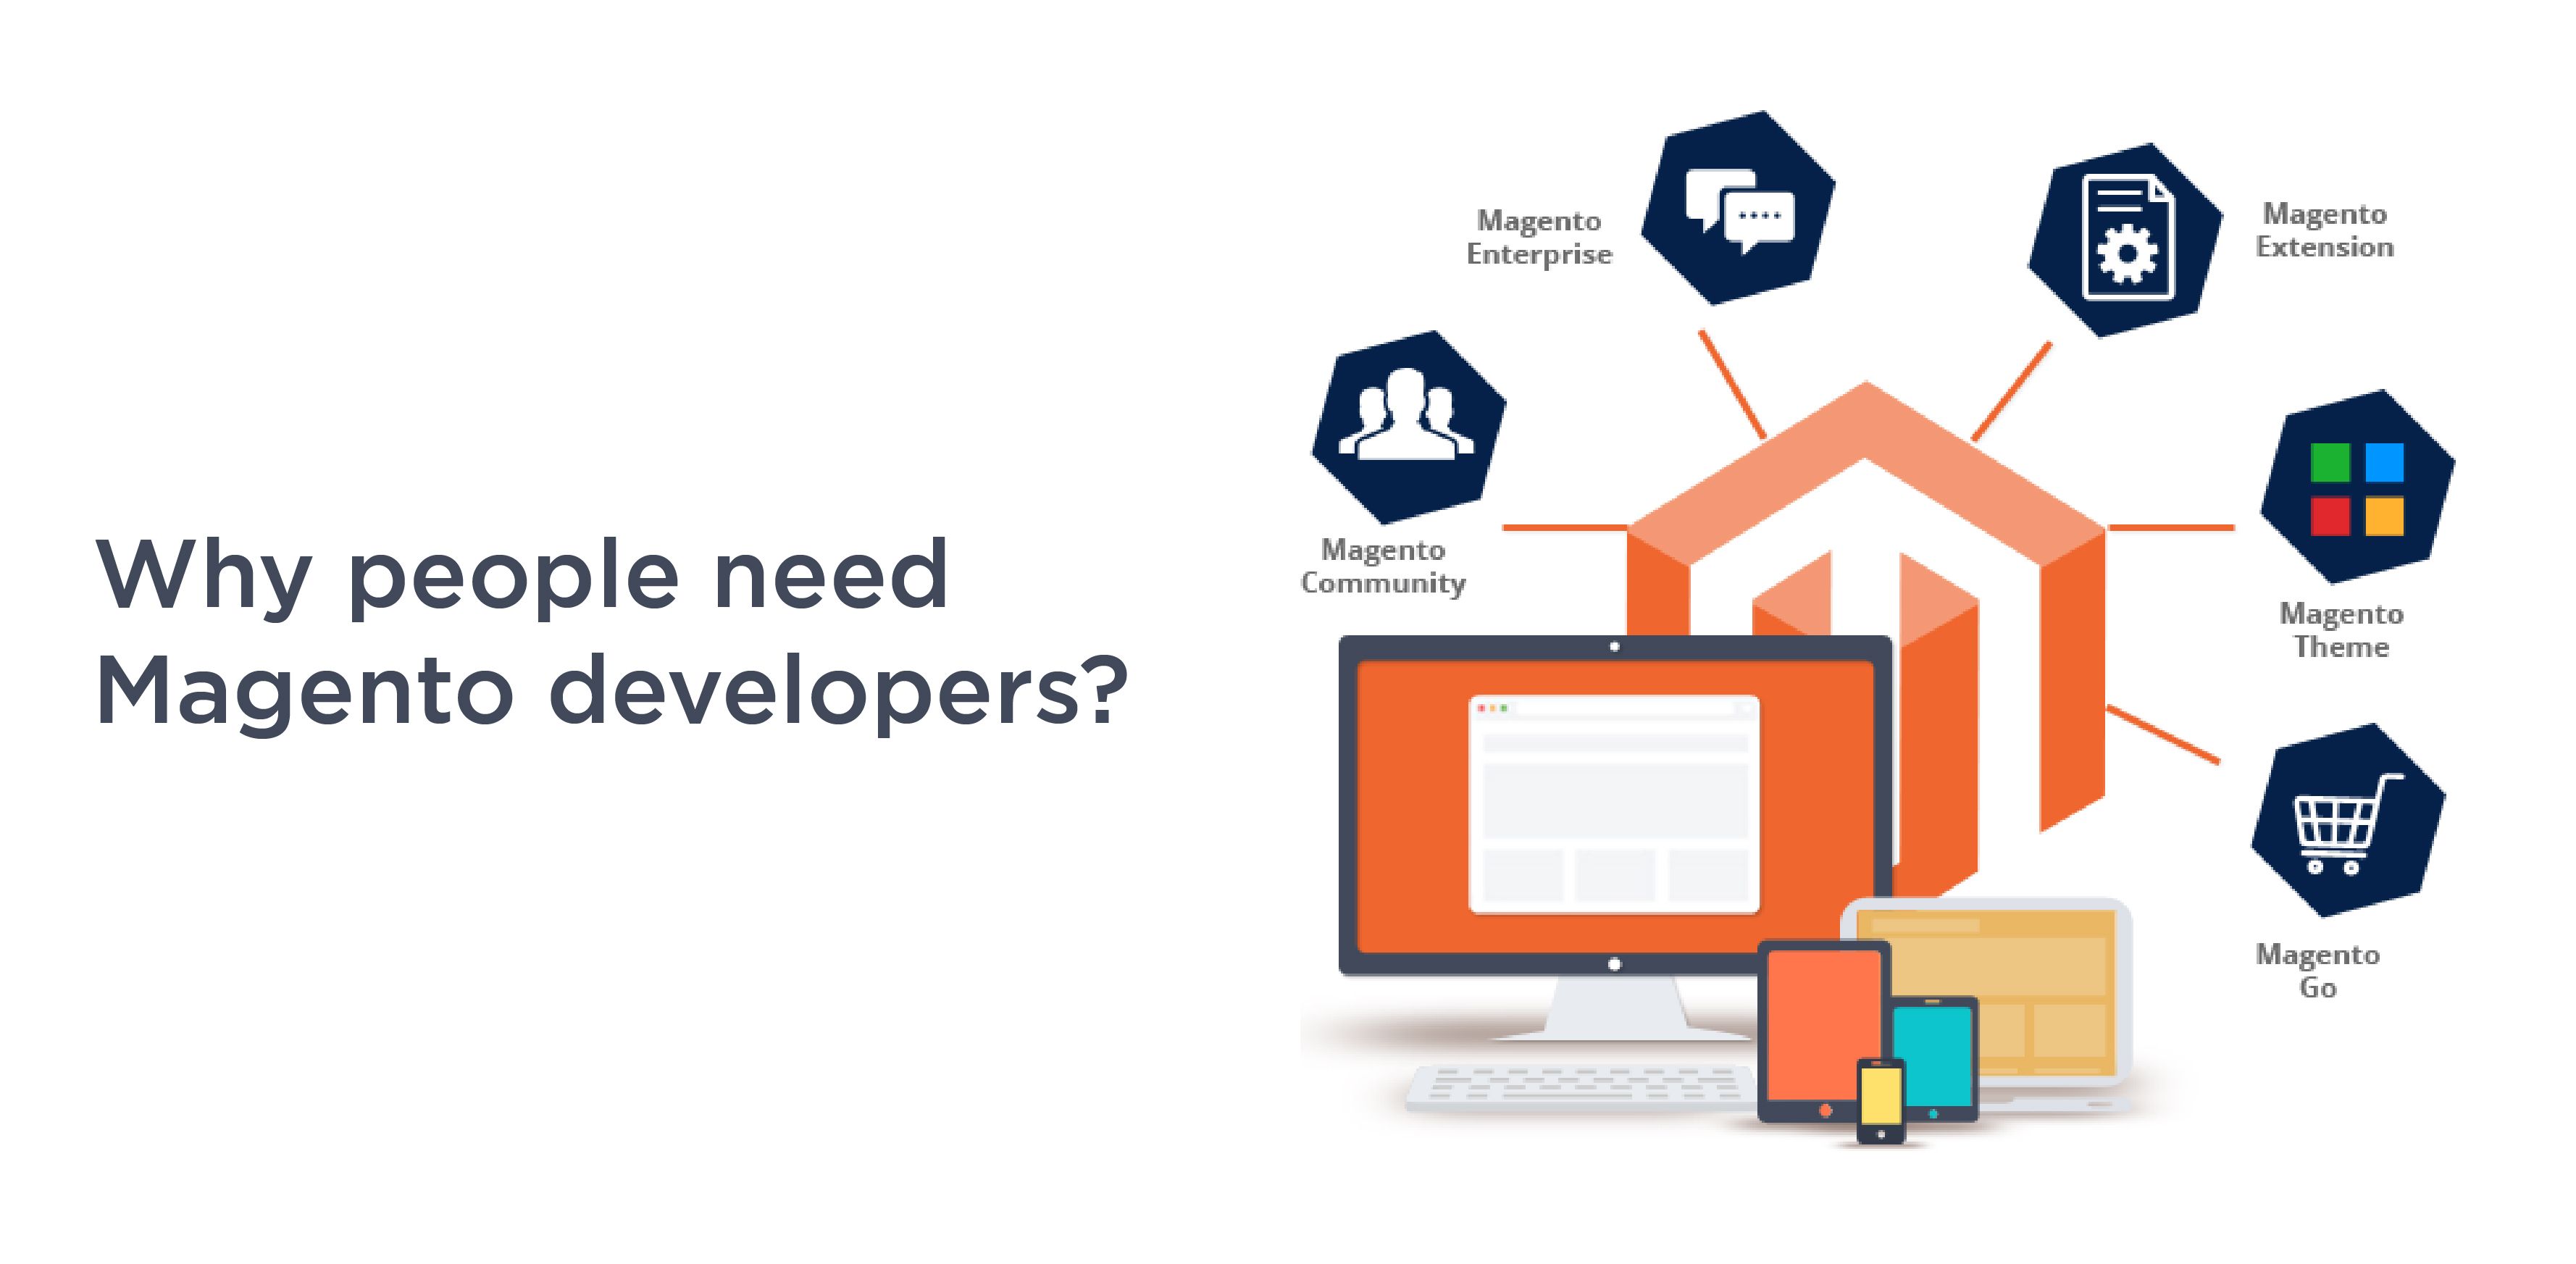 Why do people need Magento or Magento developers?